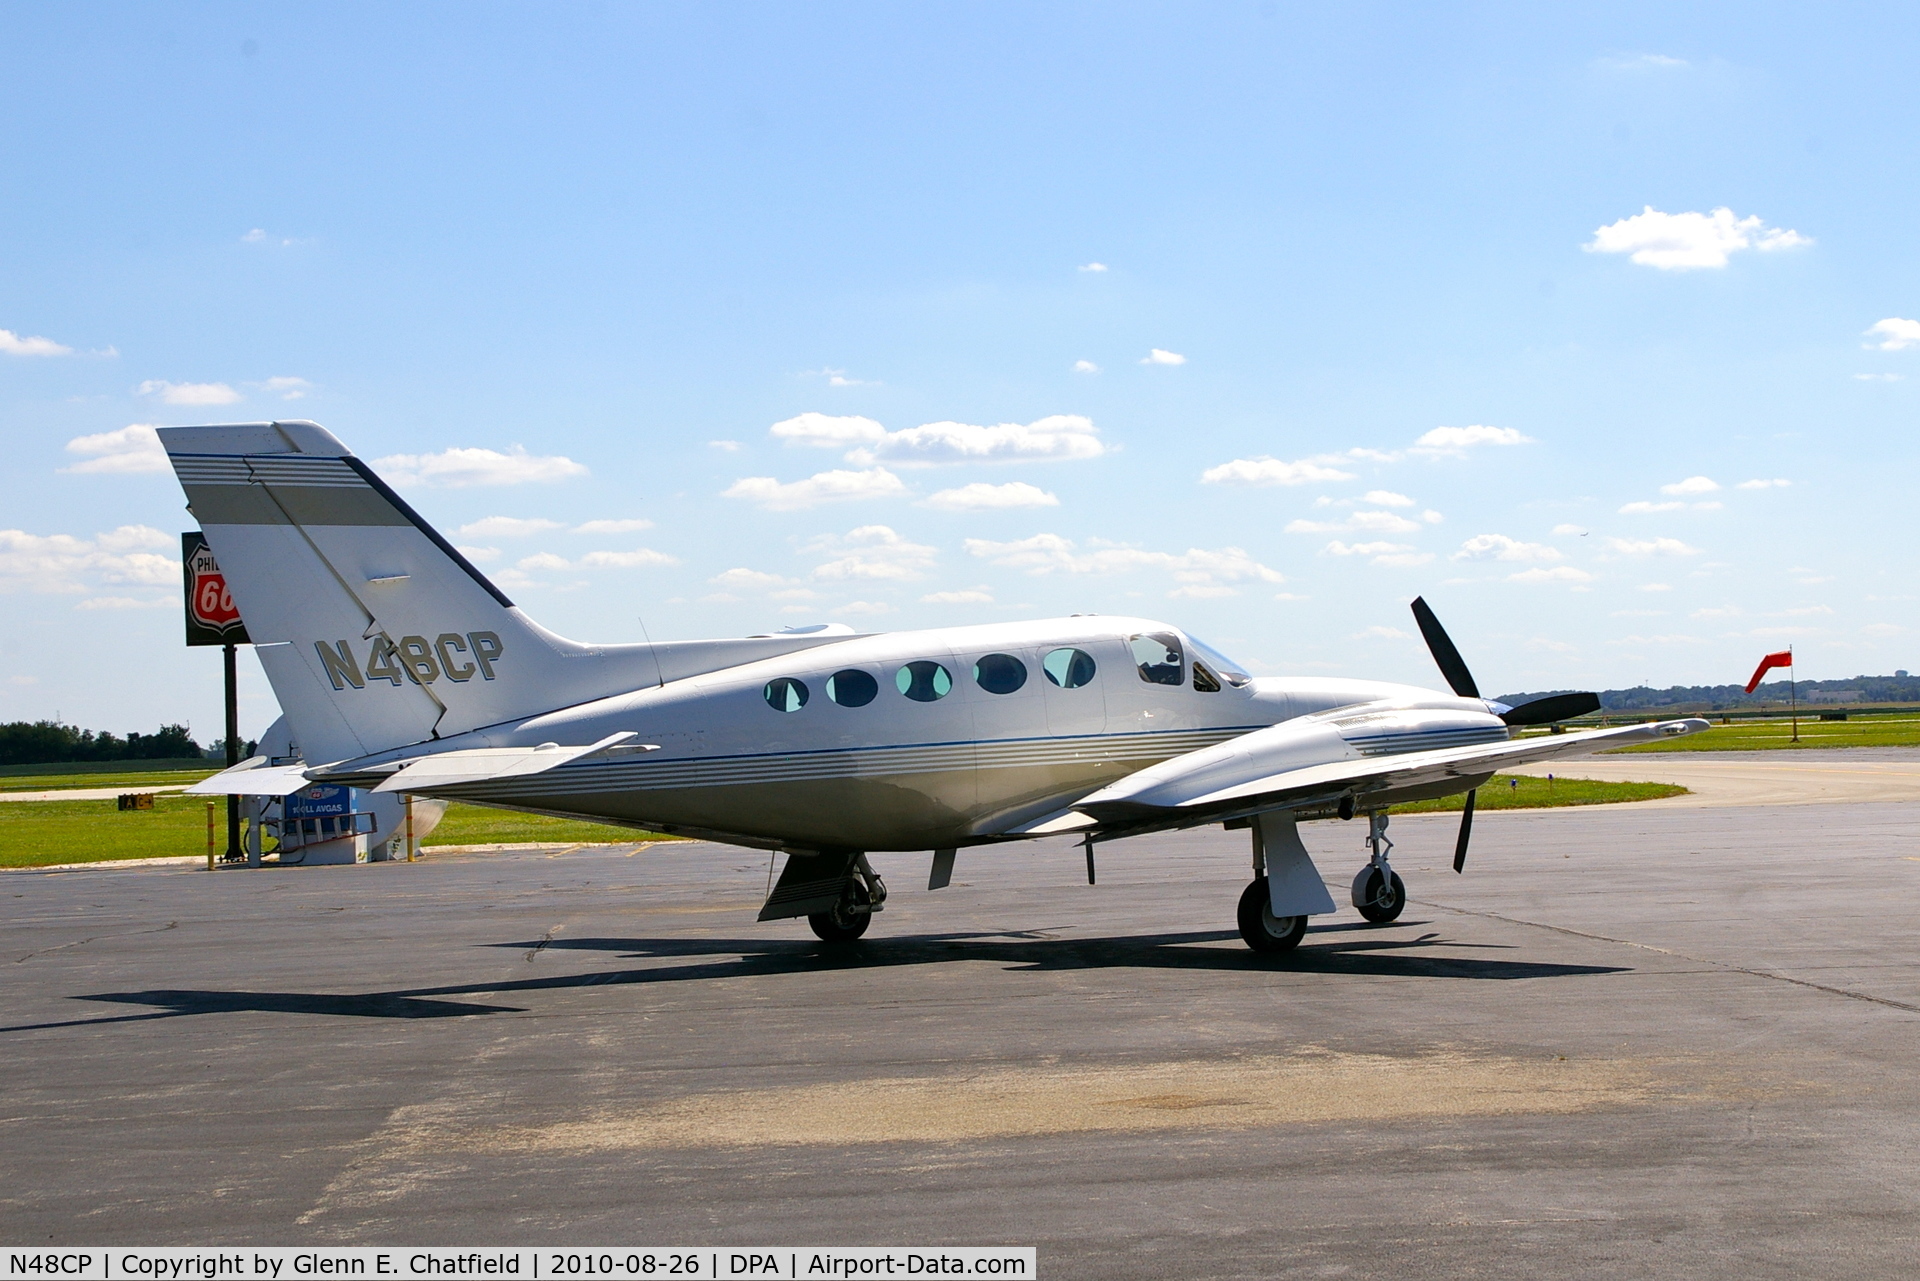 N48CP, Cessna 421C Golden Eagle C/N 421C0902, on the ramp